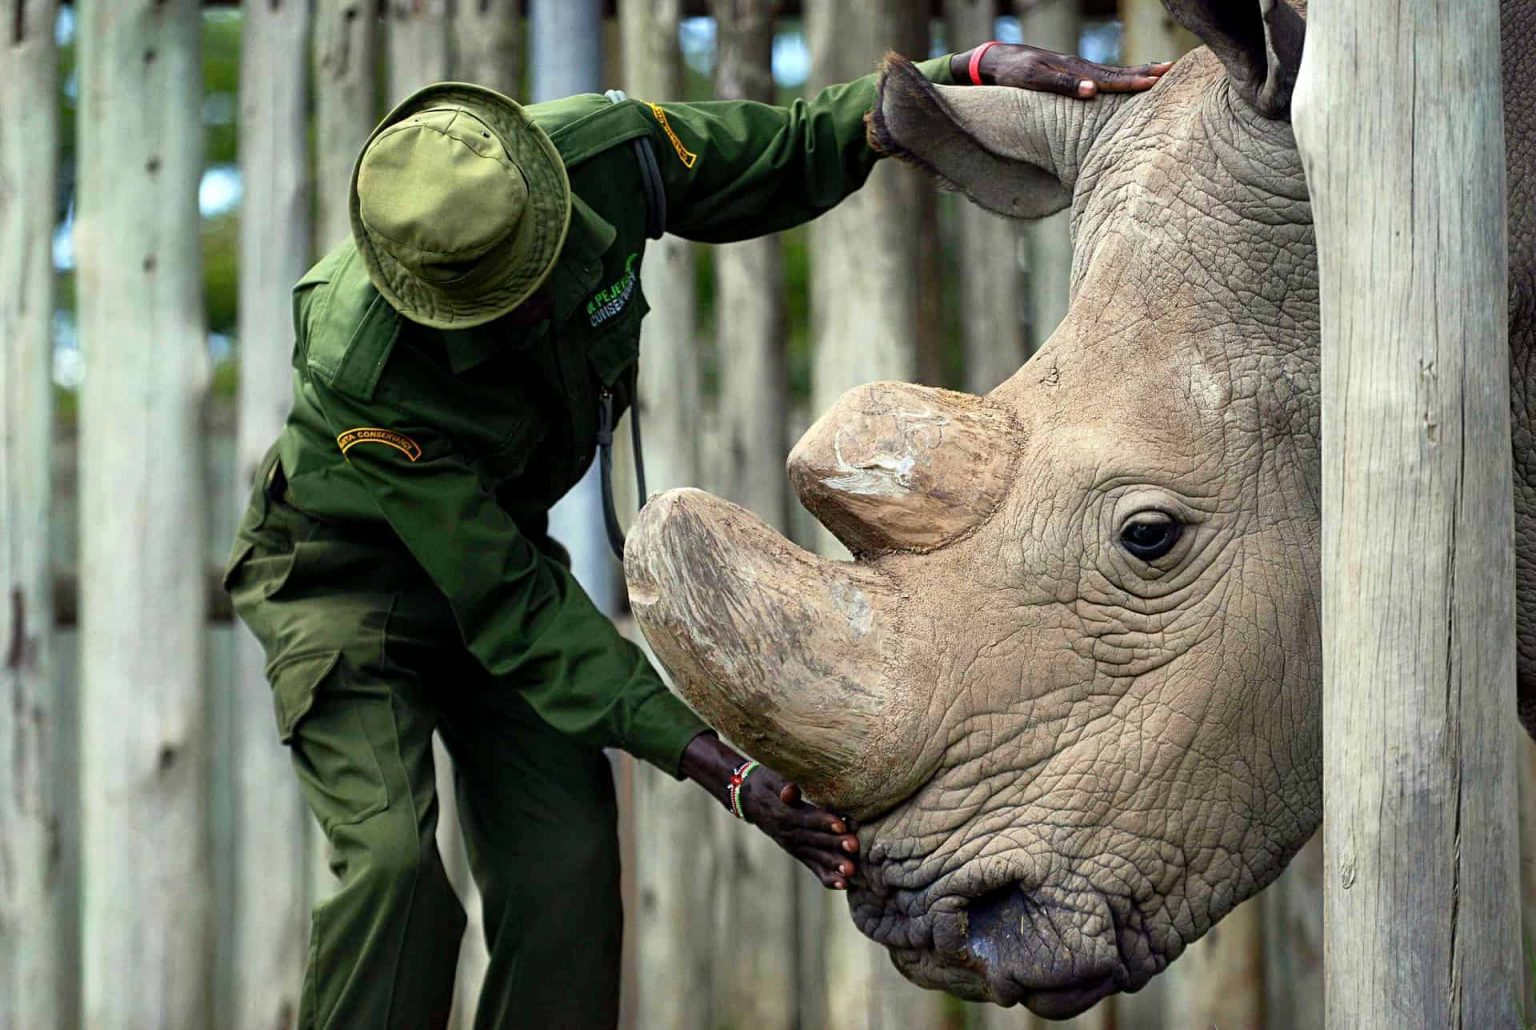 Carrying on the heritage of Sudan, the world’s last male white rhino